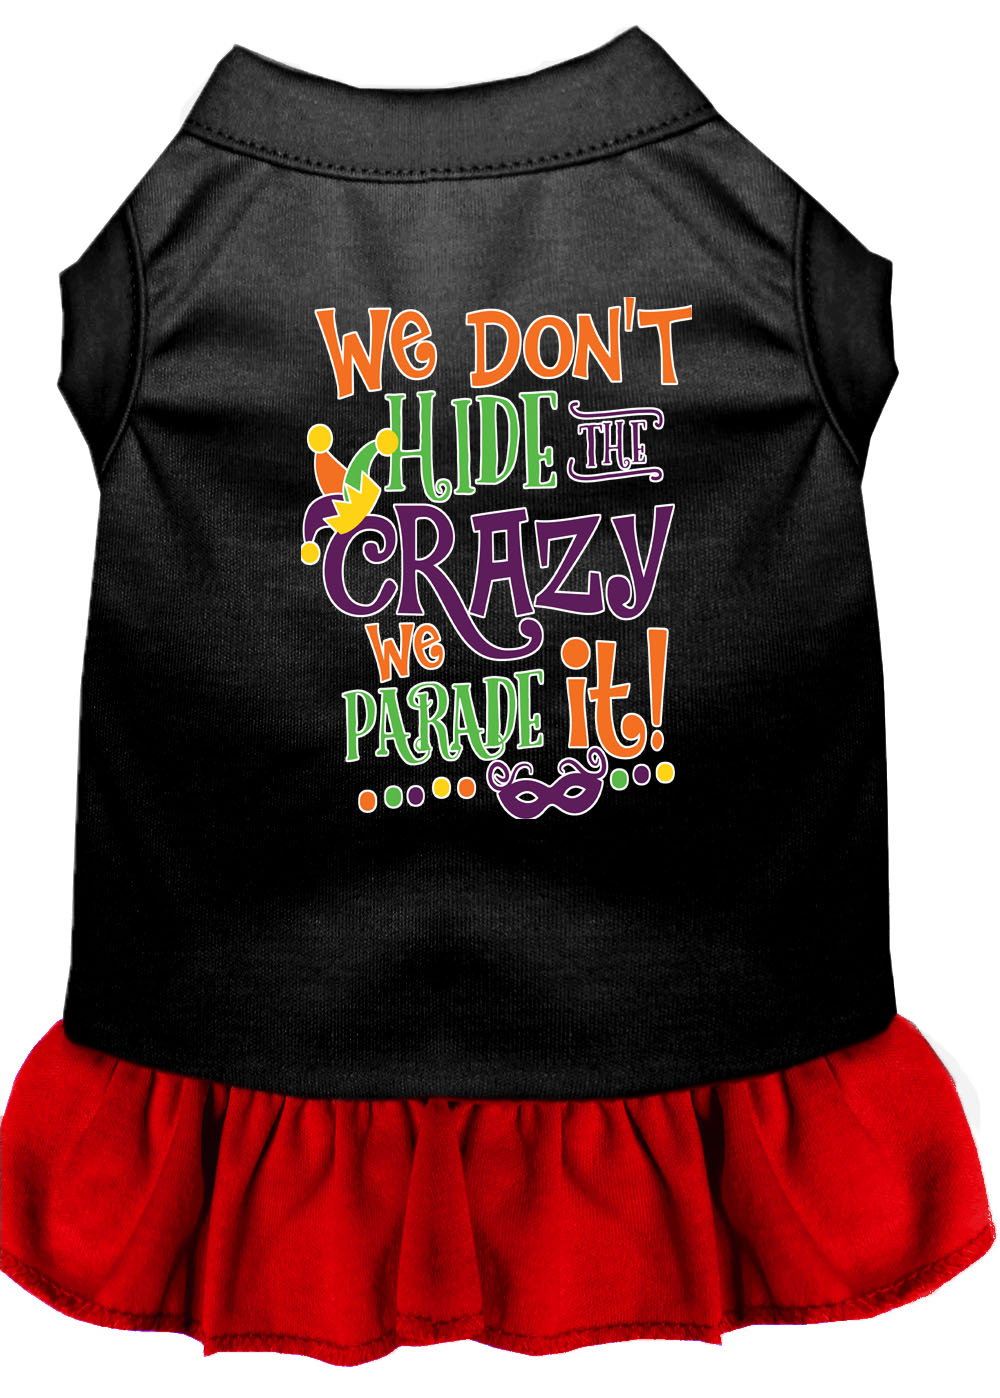 We Don't Hide the Crazy Screen Print Mardi Gras Dog Dress Black with Red XXXL